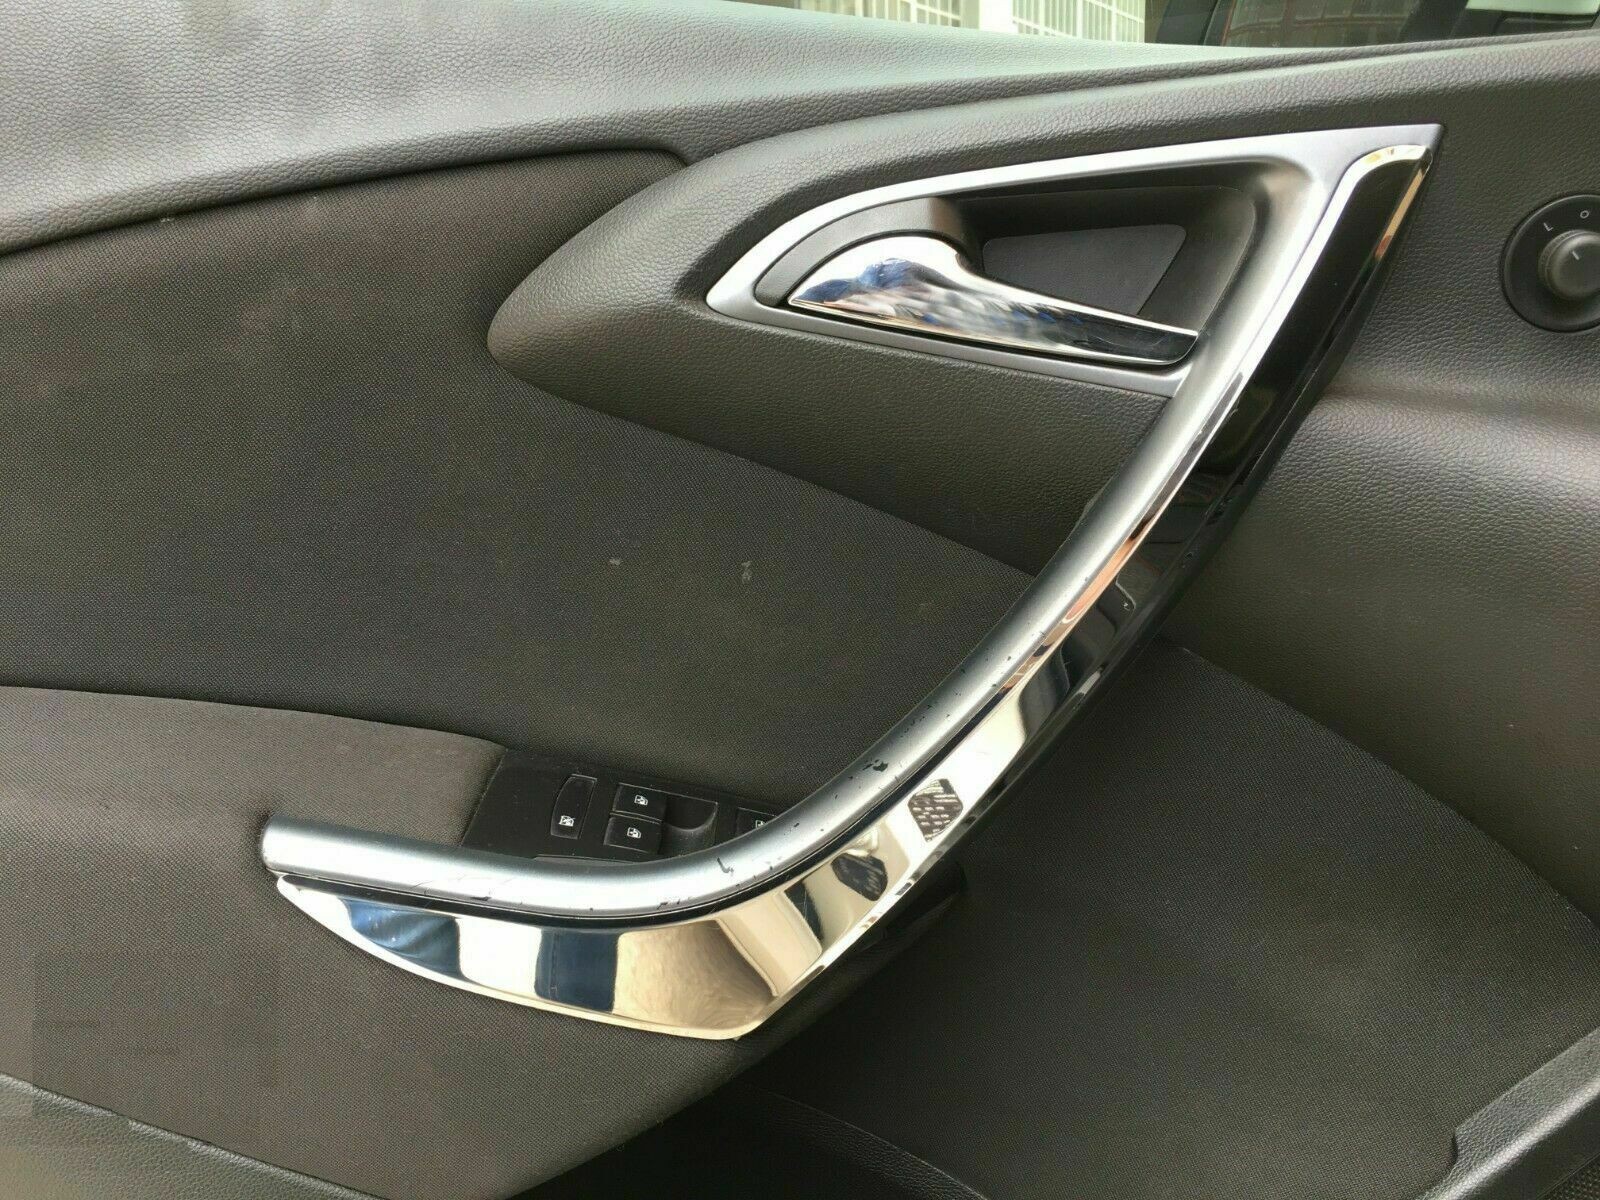 Vauxhall Opel Astra J Chrome Interior Door Handle Frame 2009 Up 2 Pieces Stainless Steel